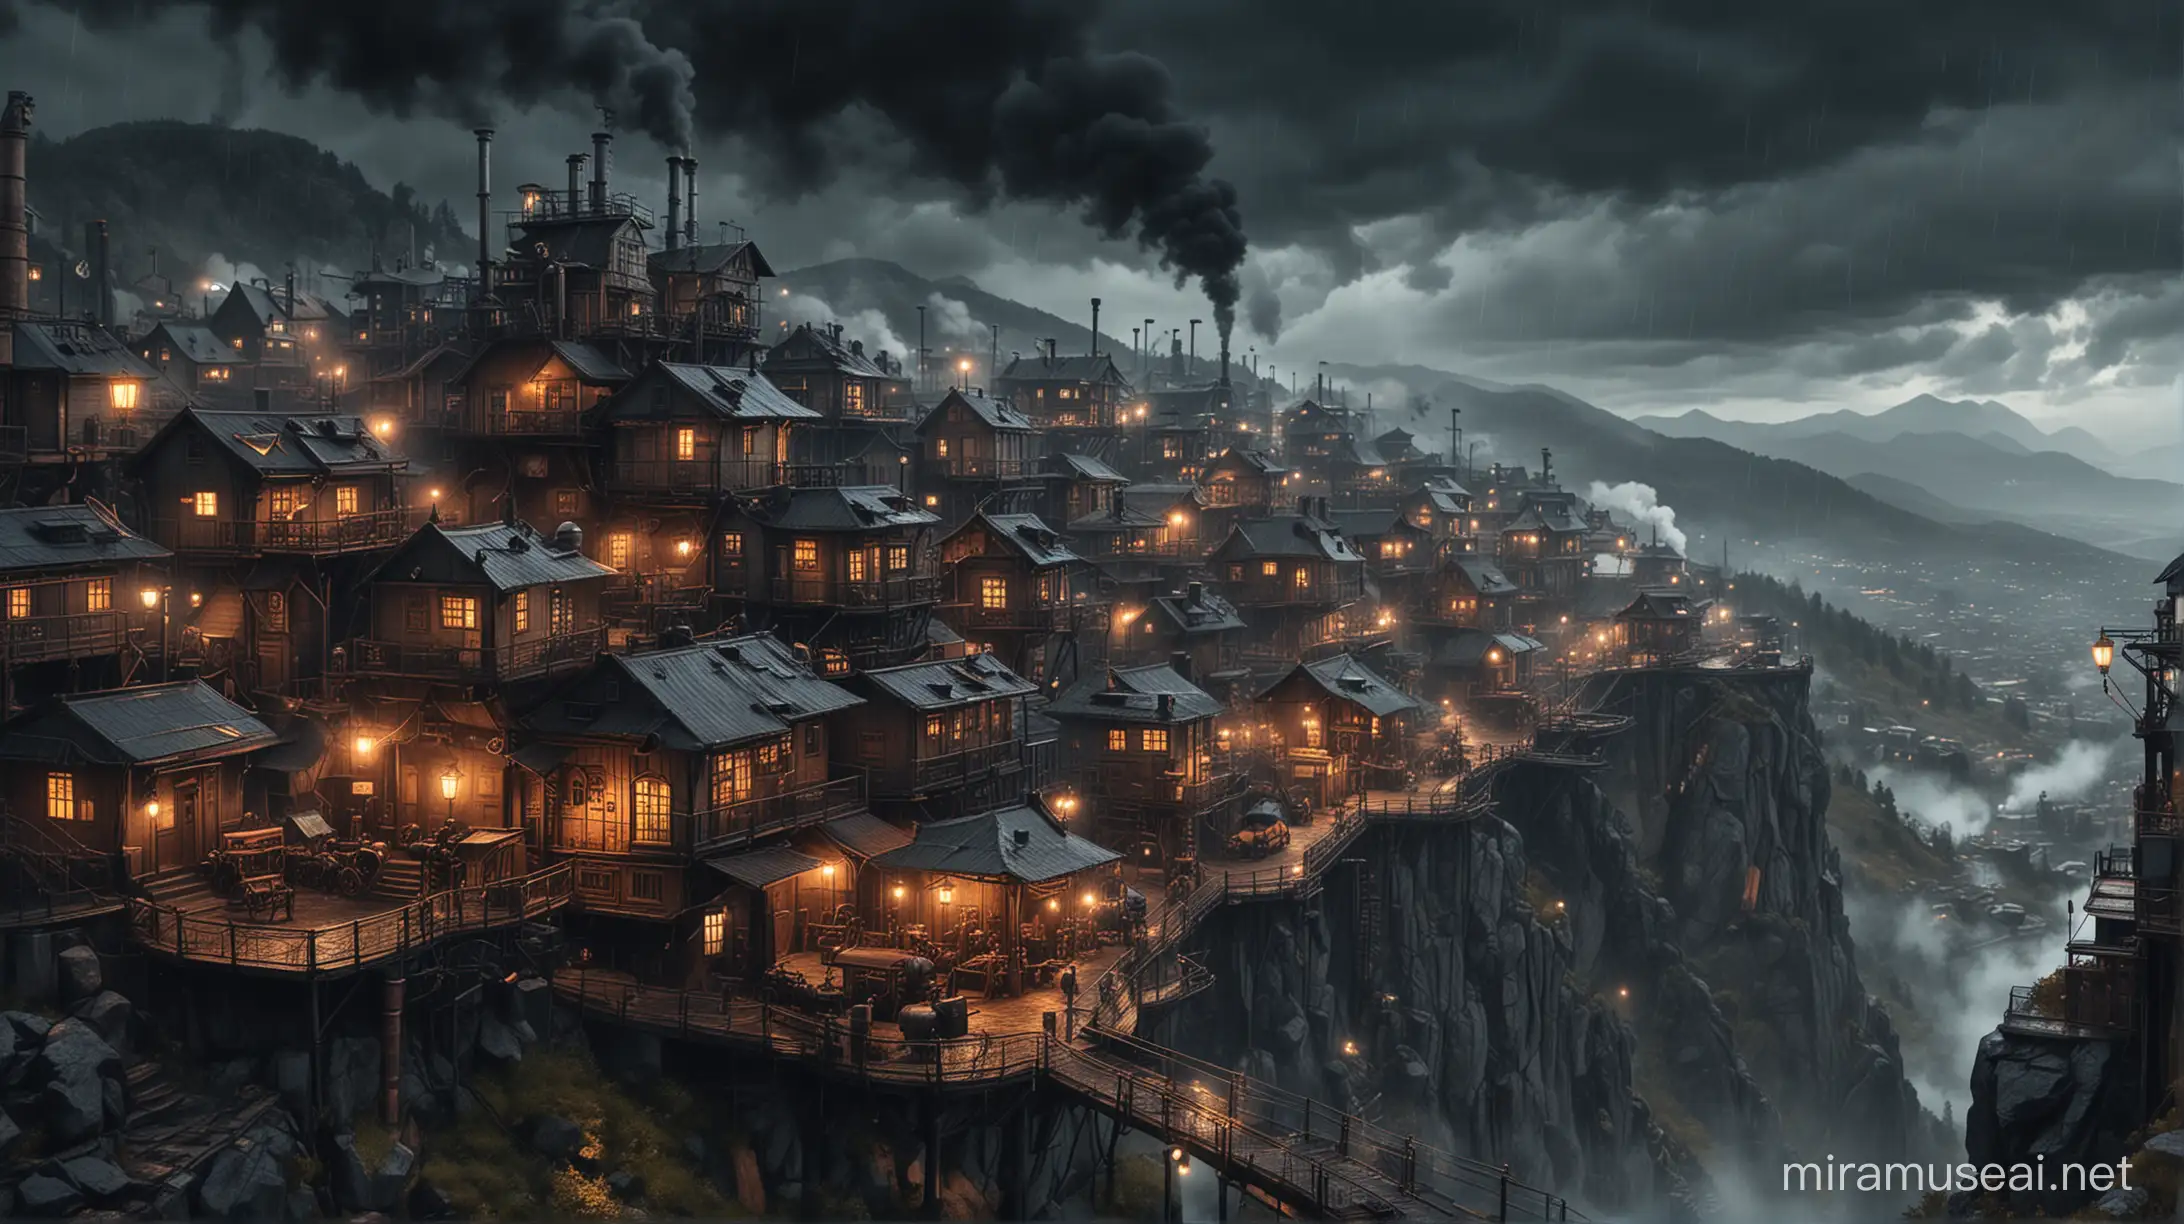 Steampunk Mountain Town Rainy Night Atmosphere with Steam and Lights